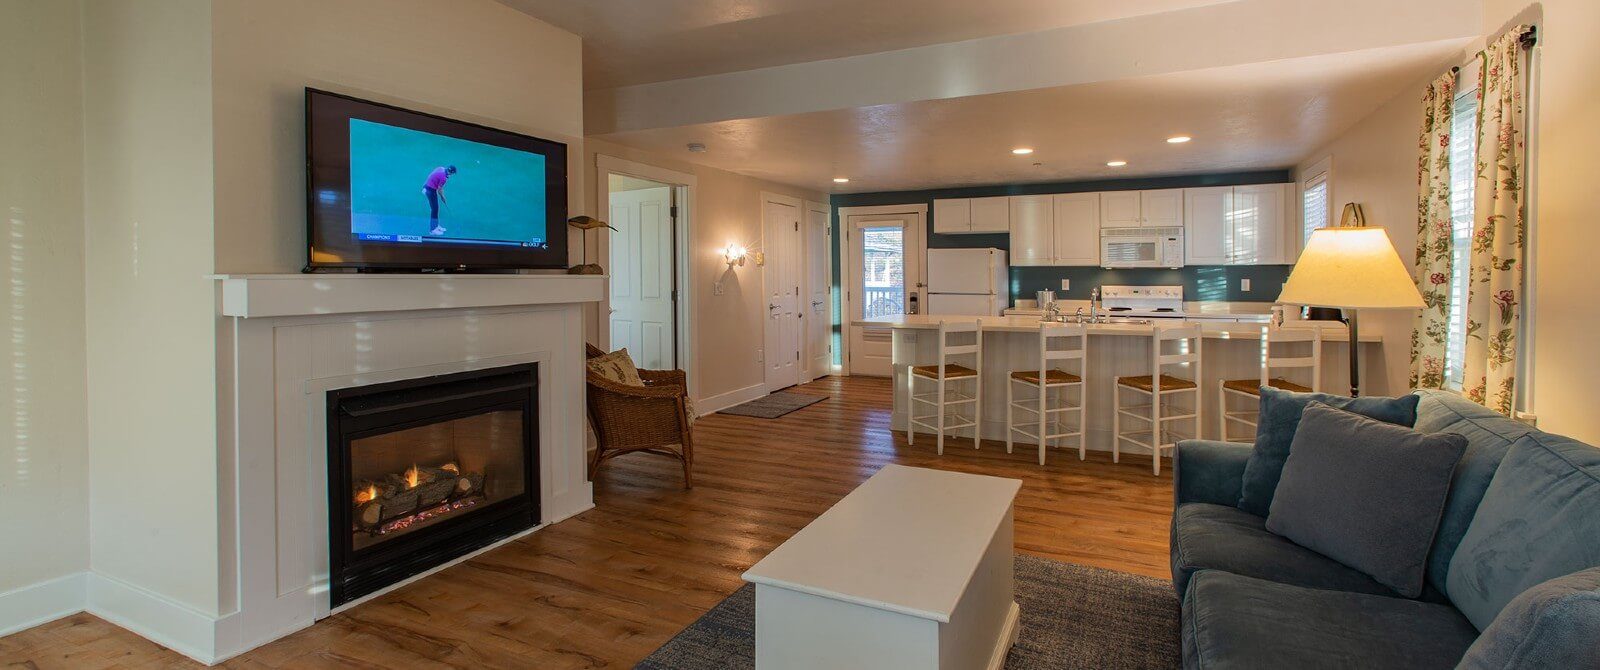 Spacious suite with kitchen, four stools, couch and coffee table in front of gas fireplace with TV on the mantle